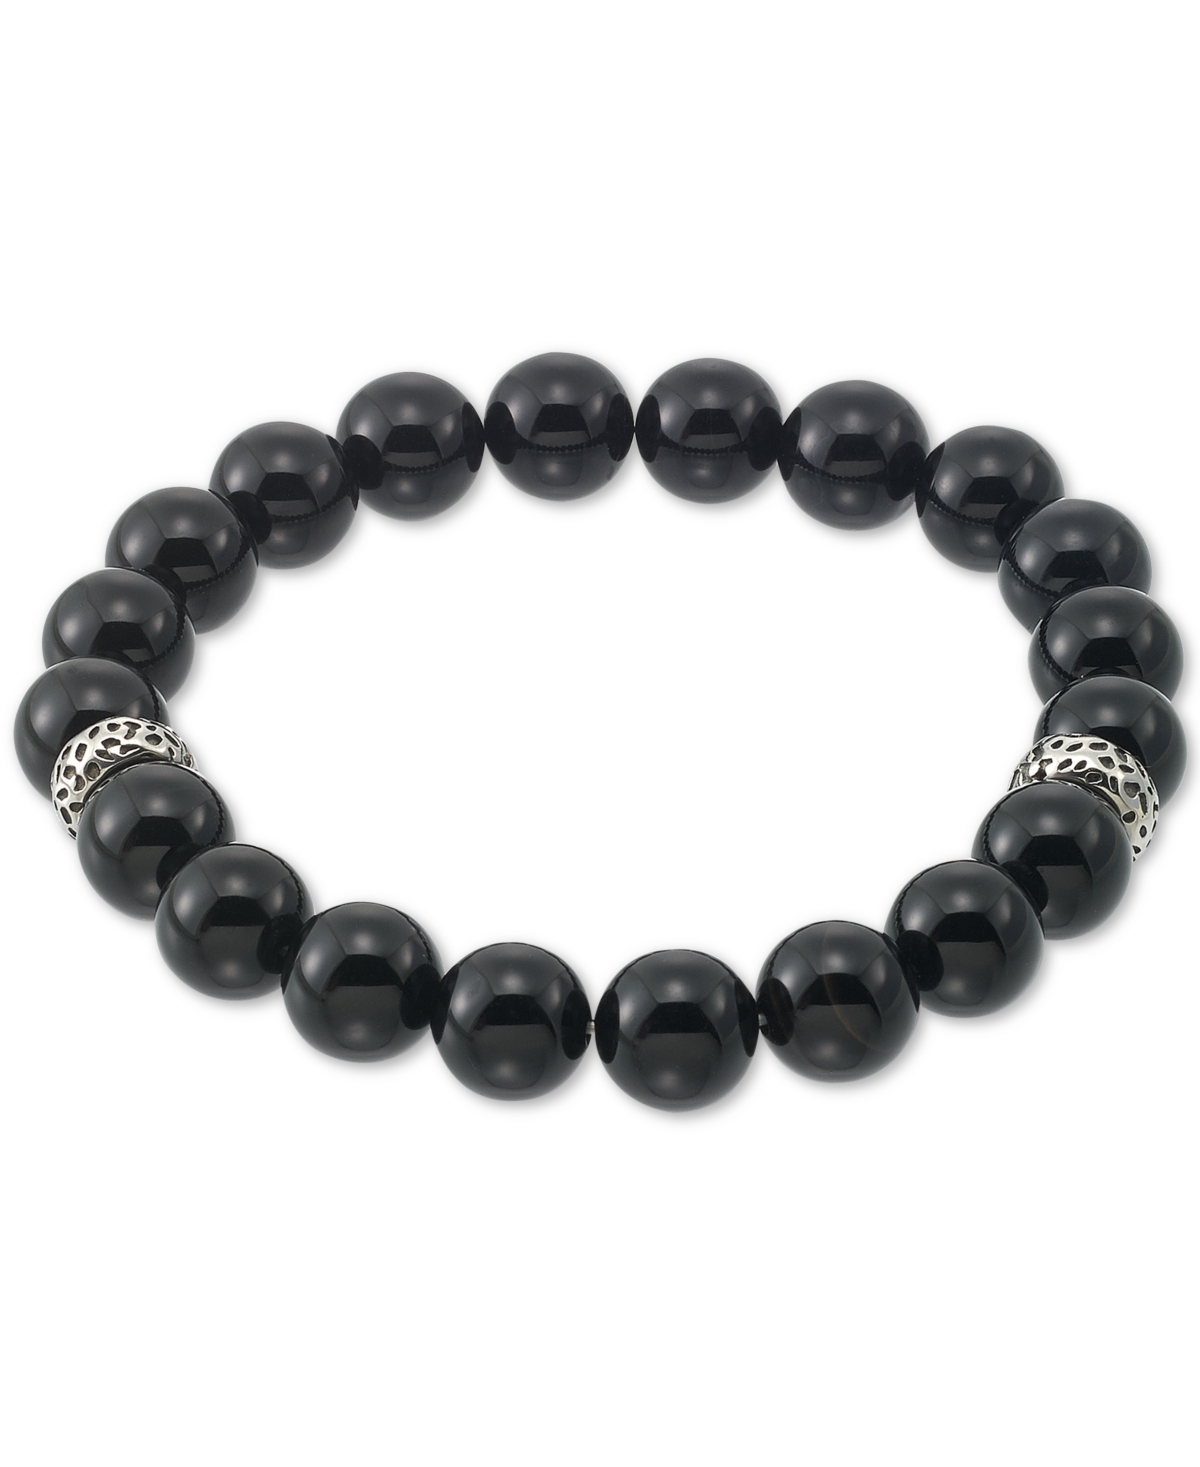 Smith Onyx (10mm) Beaded Stretch Bracelet in Stainless Steel - Stainless Steel